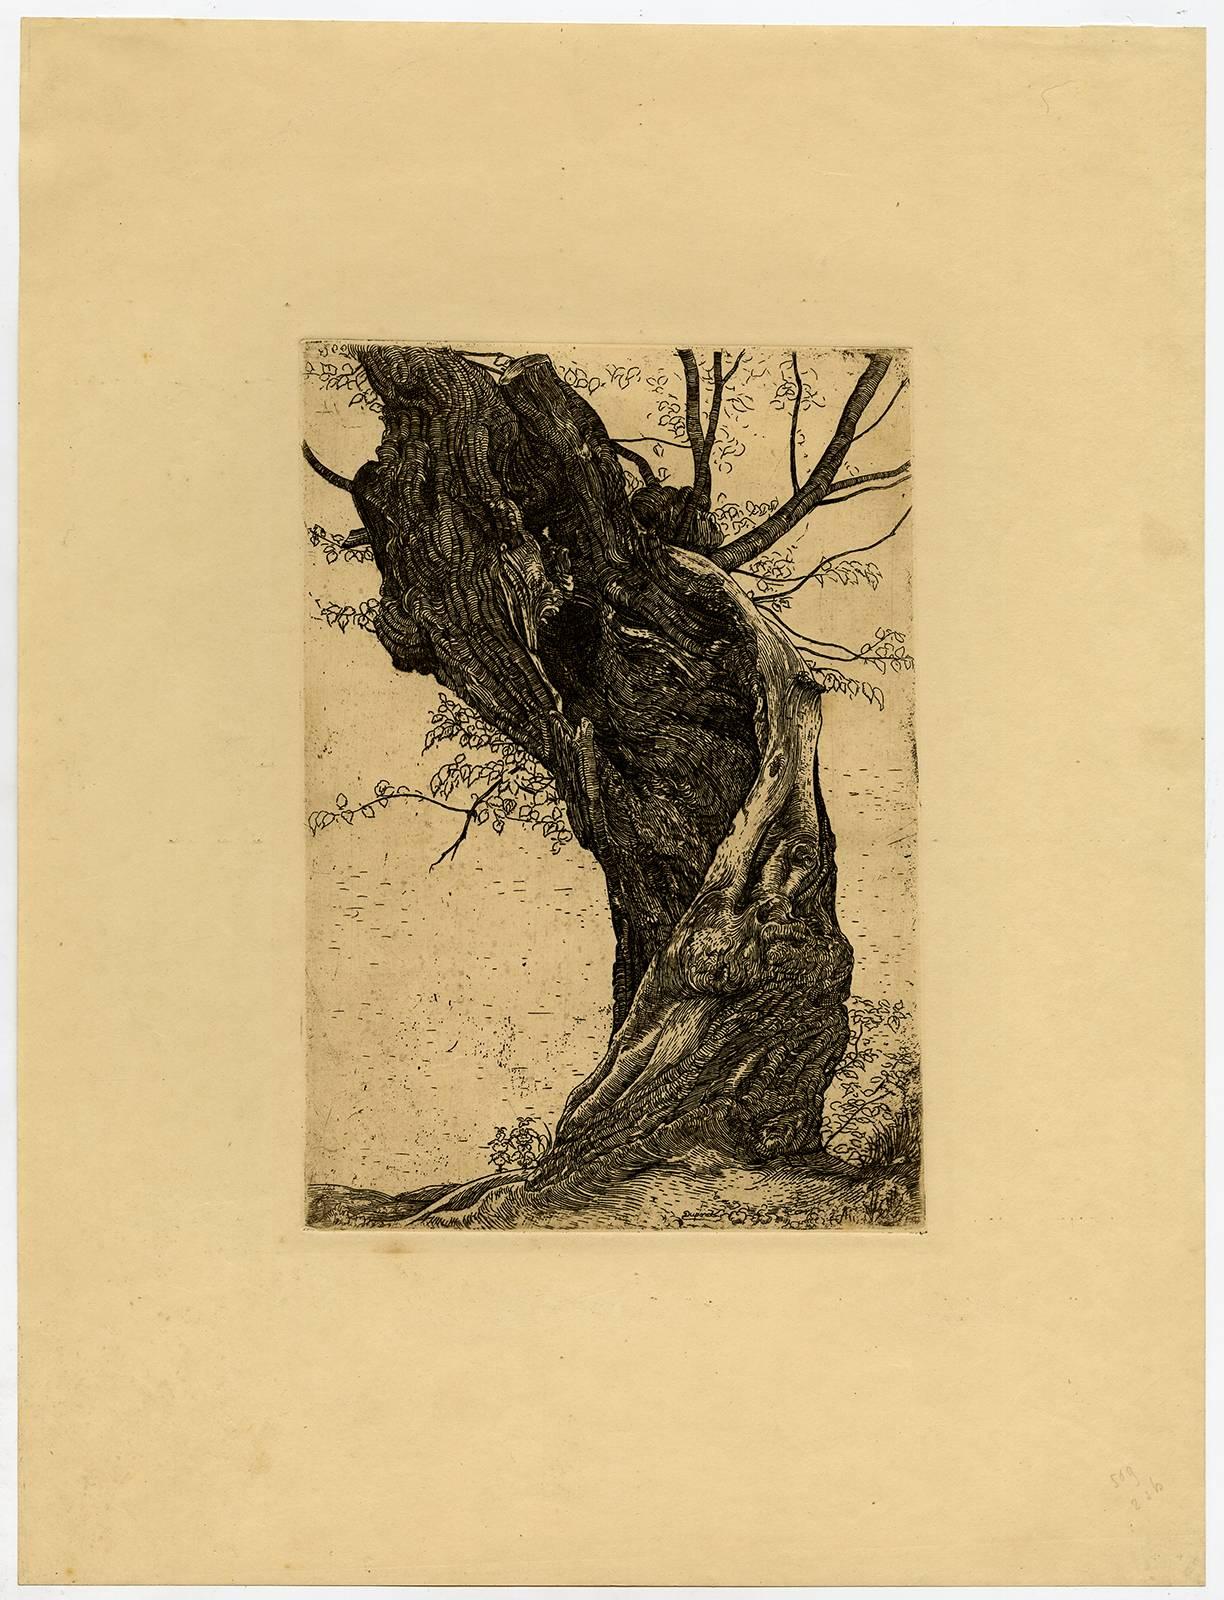 Pieter Dupont Landscape Print - Untitled - Large willow tree.